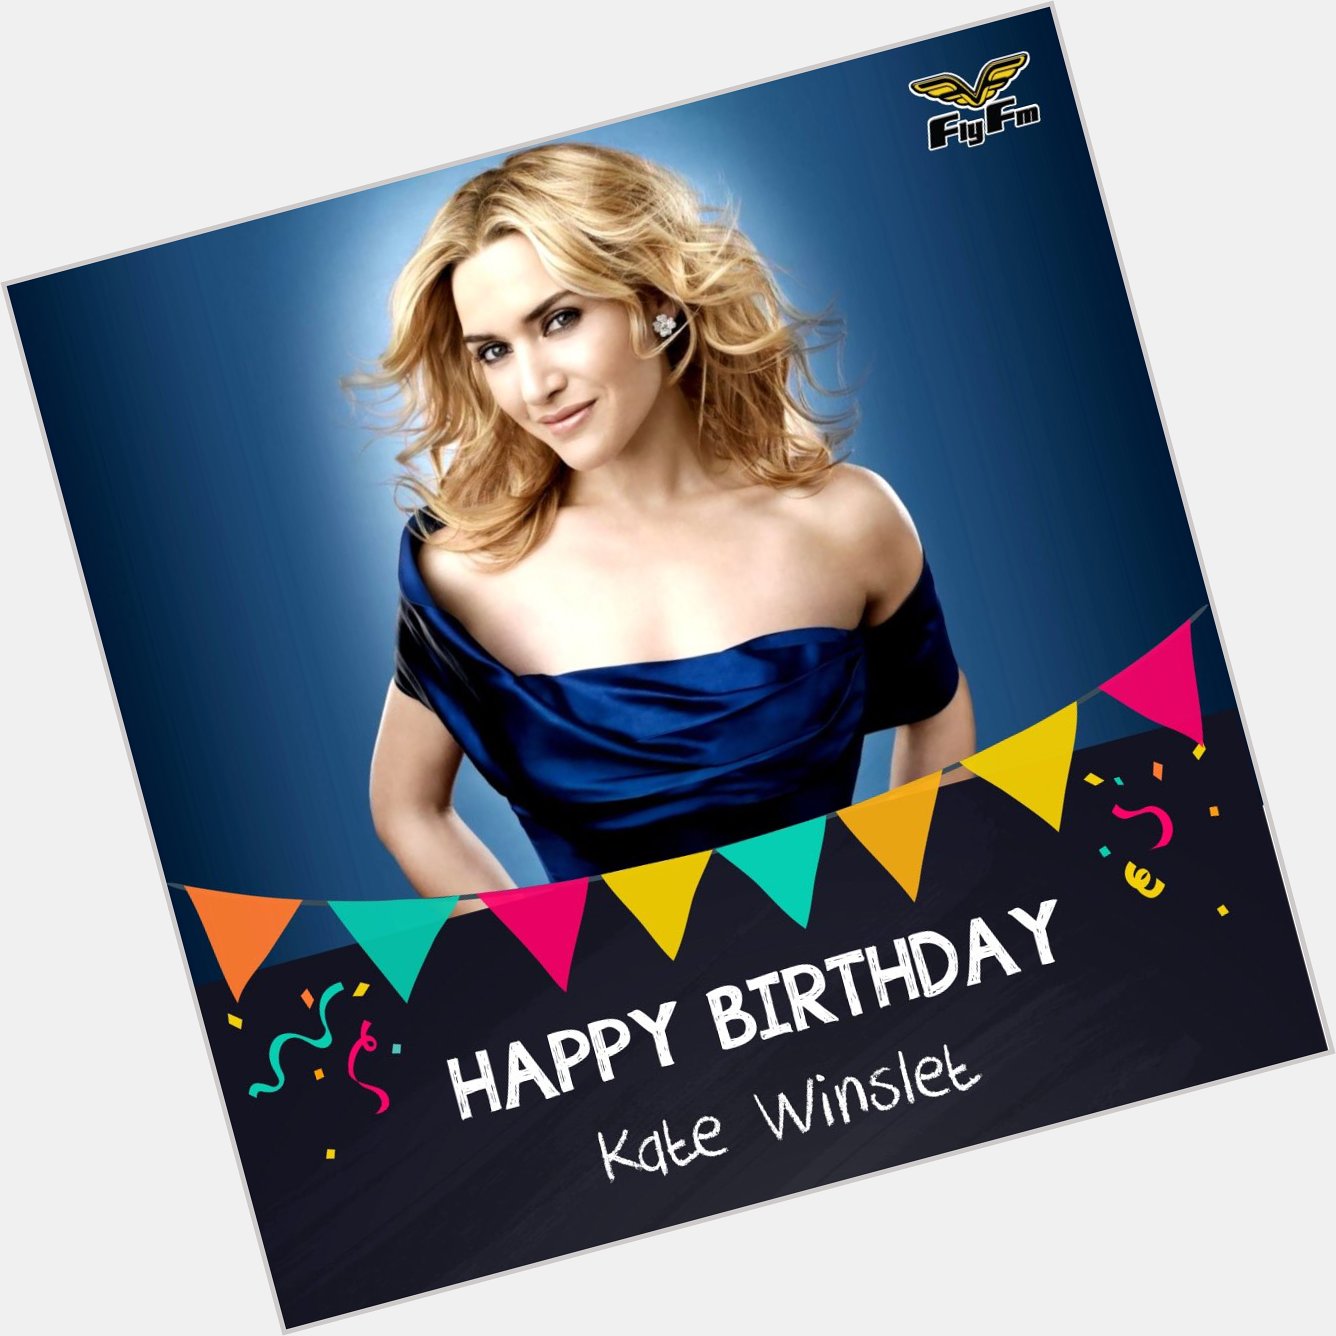 Forever beautiful, Kate Winslet is turning 42 today! HAPPY BIRTHDAY KATE and all those celebrating today! 